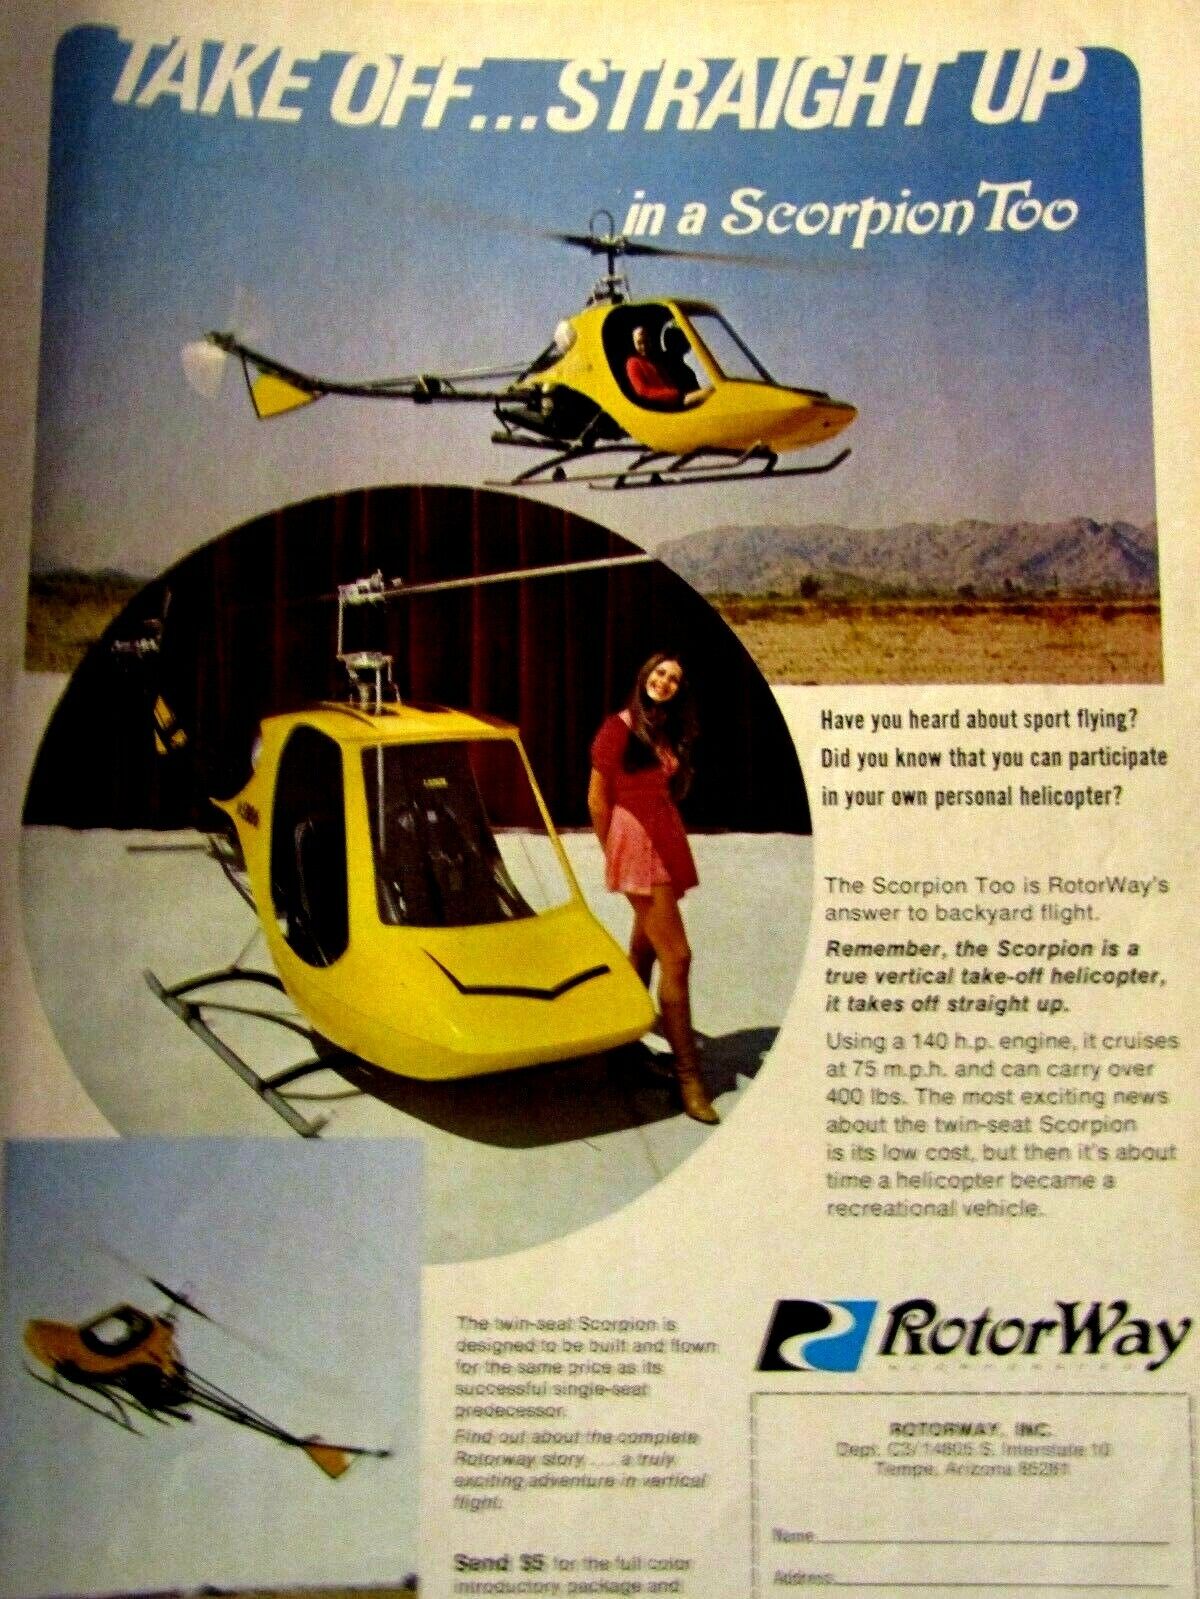 1972 Rotor Way Scorpion Too Helicopter Original Print Ad 8.5 x 11\